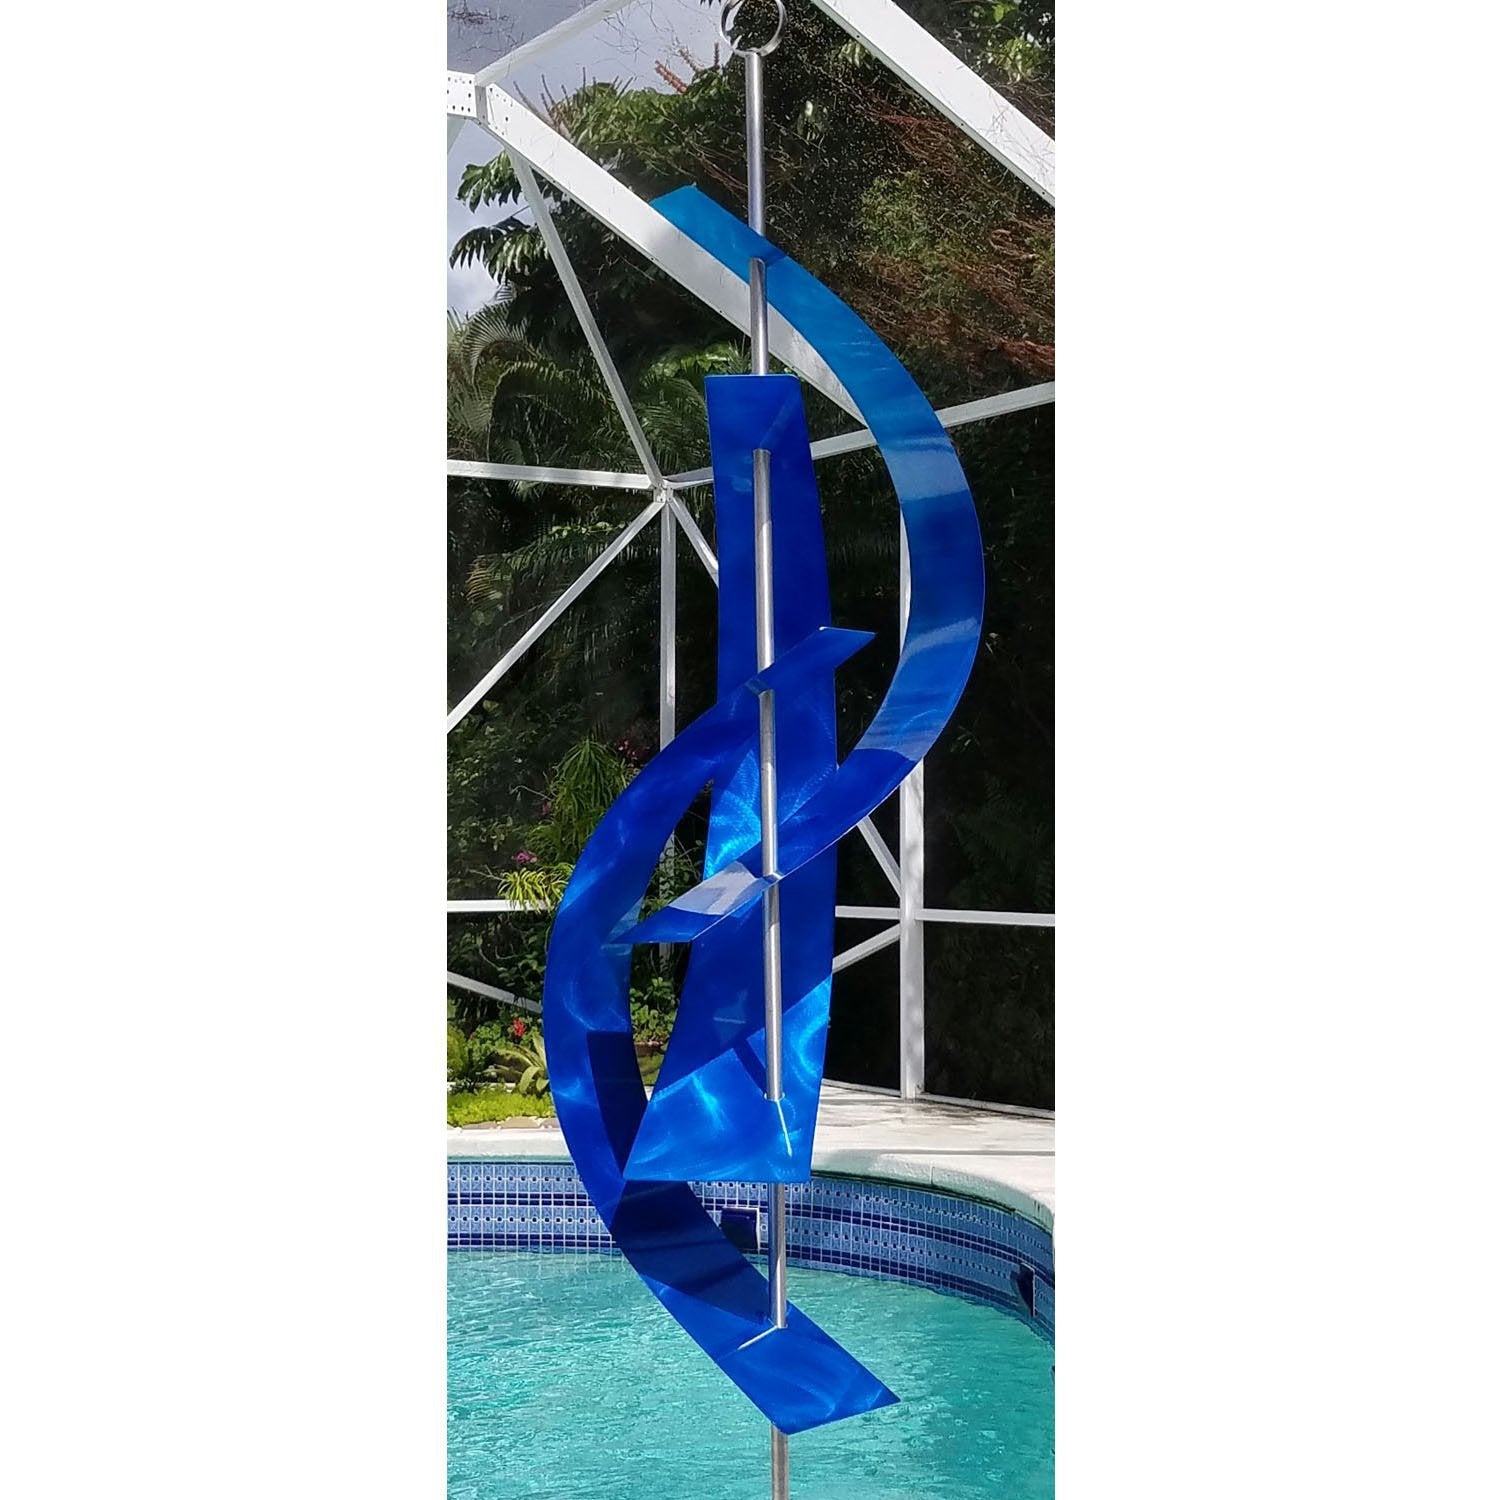 Large Blue Abstract Metal Sculpture Art Home Decor Statue - Reaching Out  Blue - Statements2000